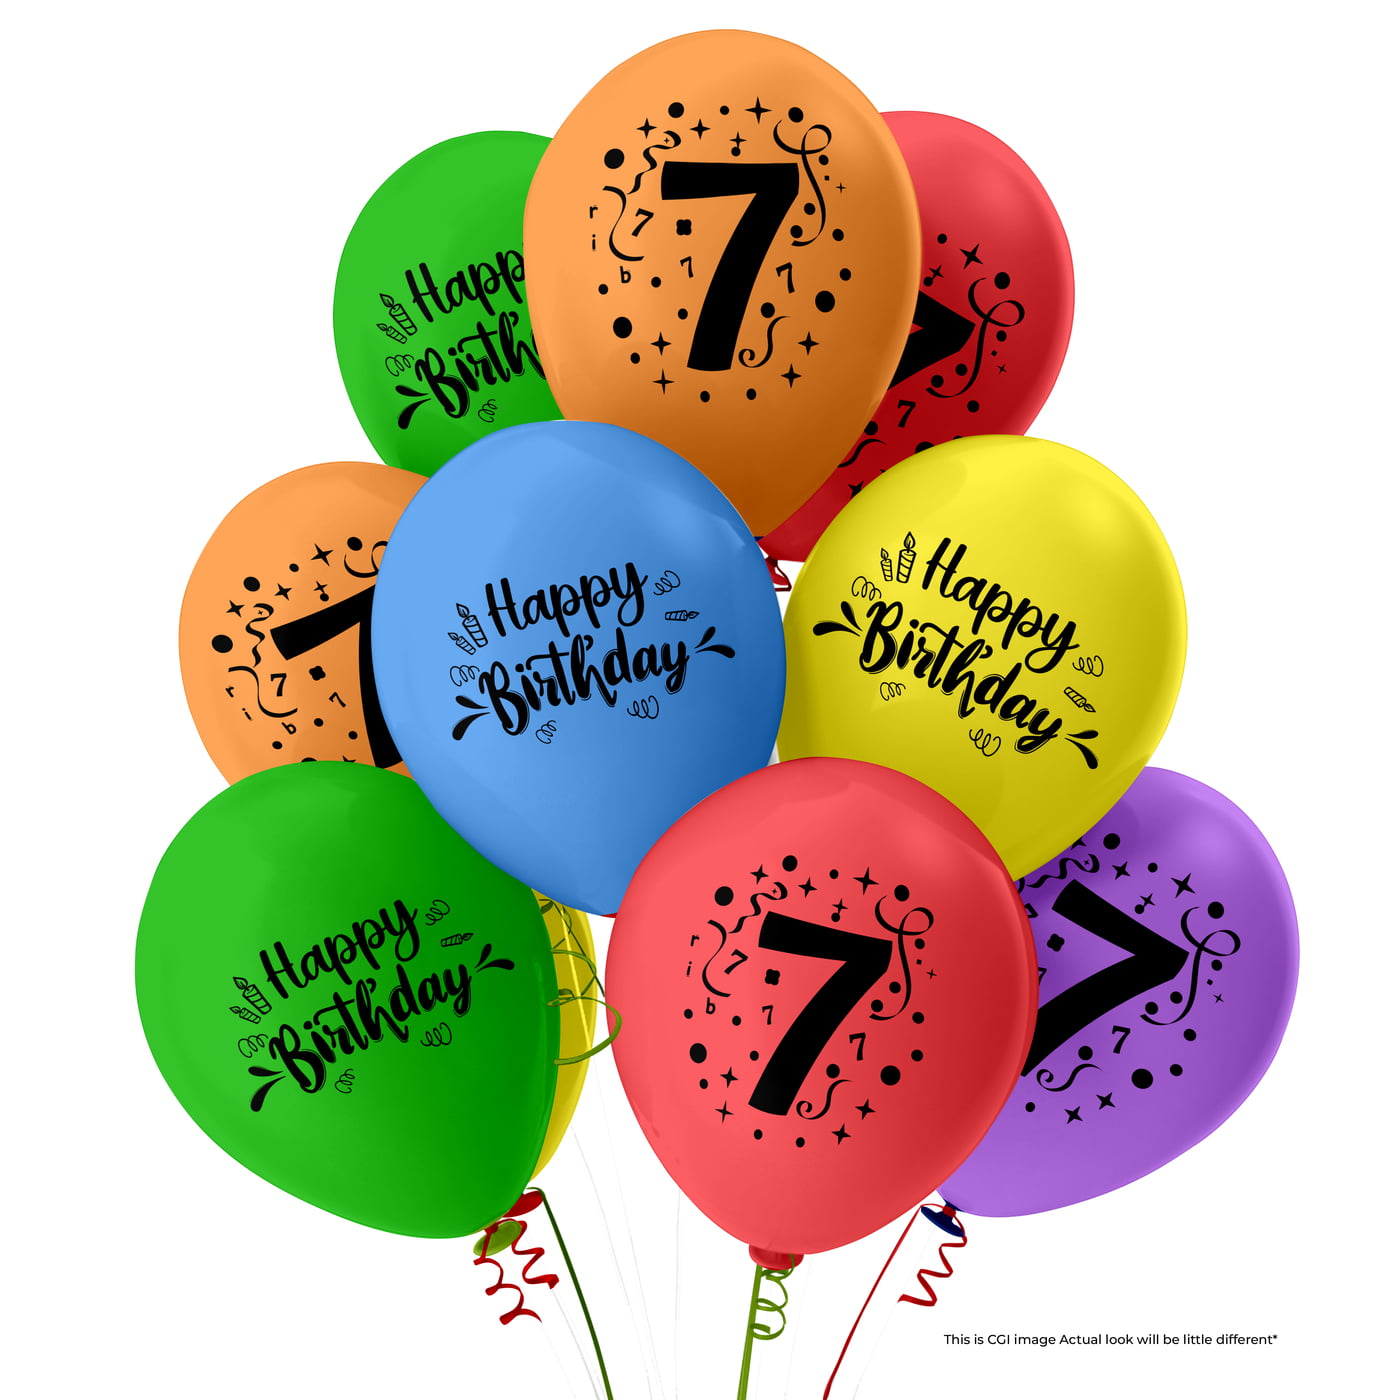 The Magic Balloons-7 Number Balloons and Happy Birthday Latex Balloons With Banner For Seven No. Theme Balloons Pack of 21pcs | 20pcs Of Balloons and A Banner | Multicolor Balloons For Birthday